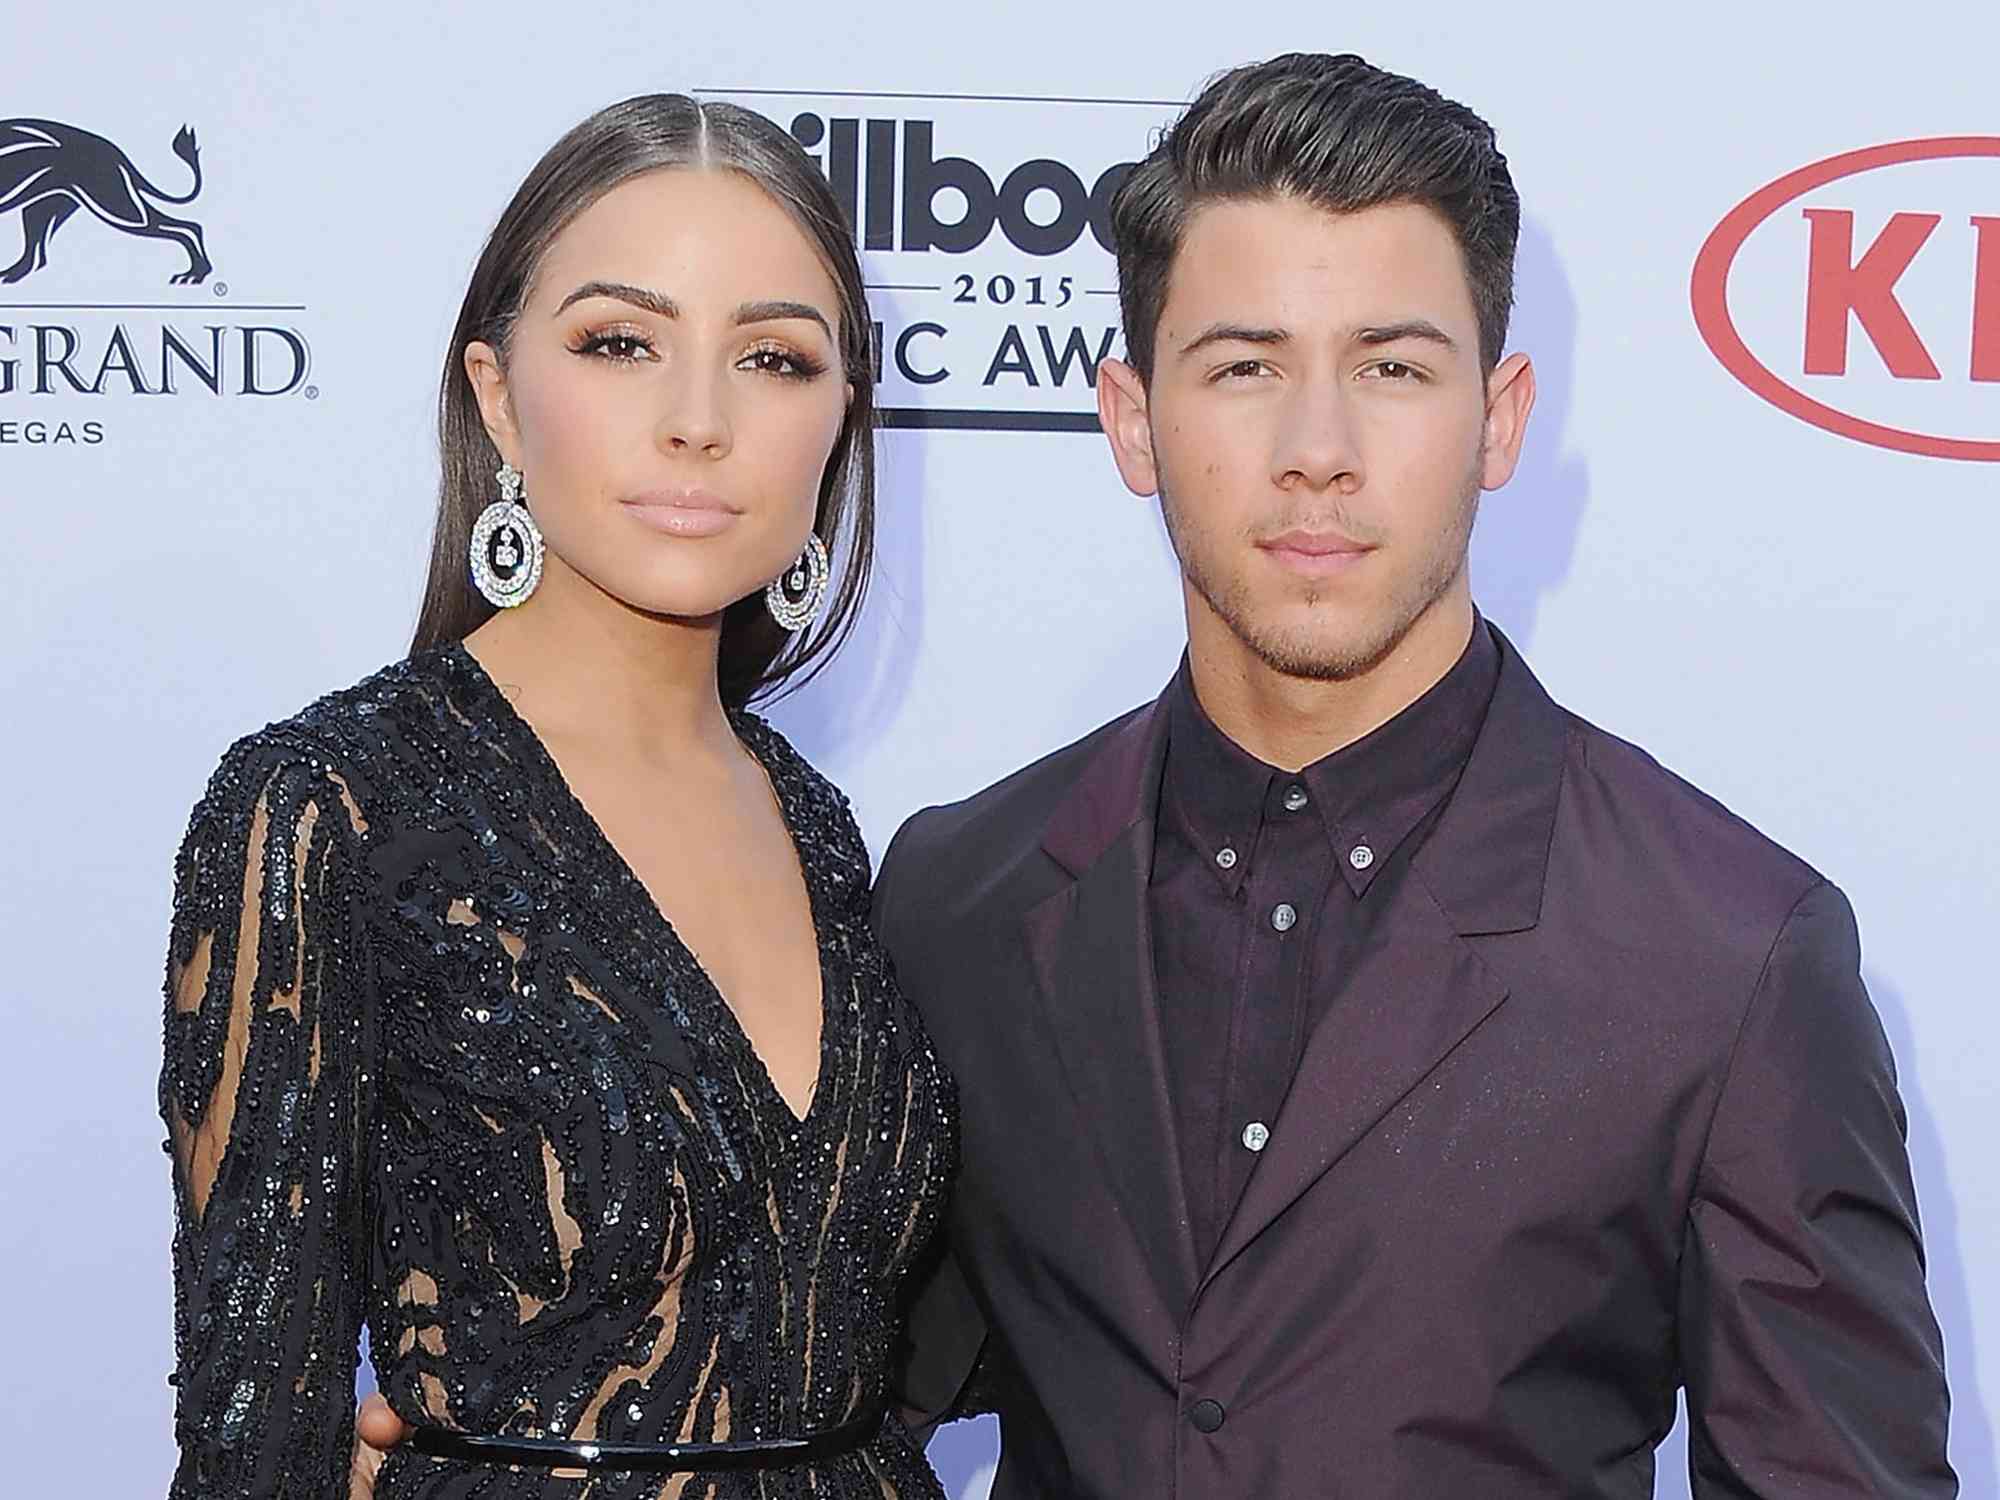 Olivia Culpo and Nick Jonas arrive at the 2015 Billboard Music Awards at MGM Garden Arena on May 17, 2015 in Las Vegas, Nevada